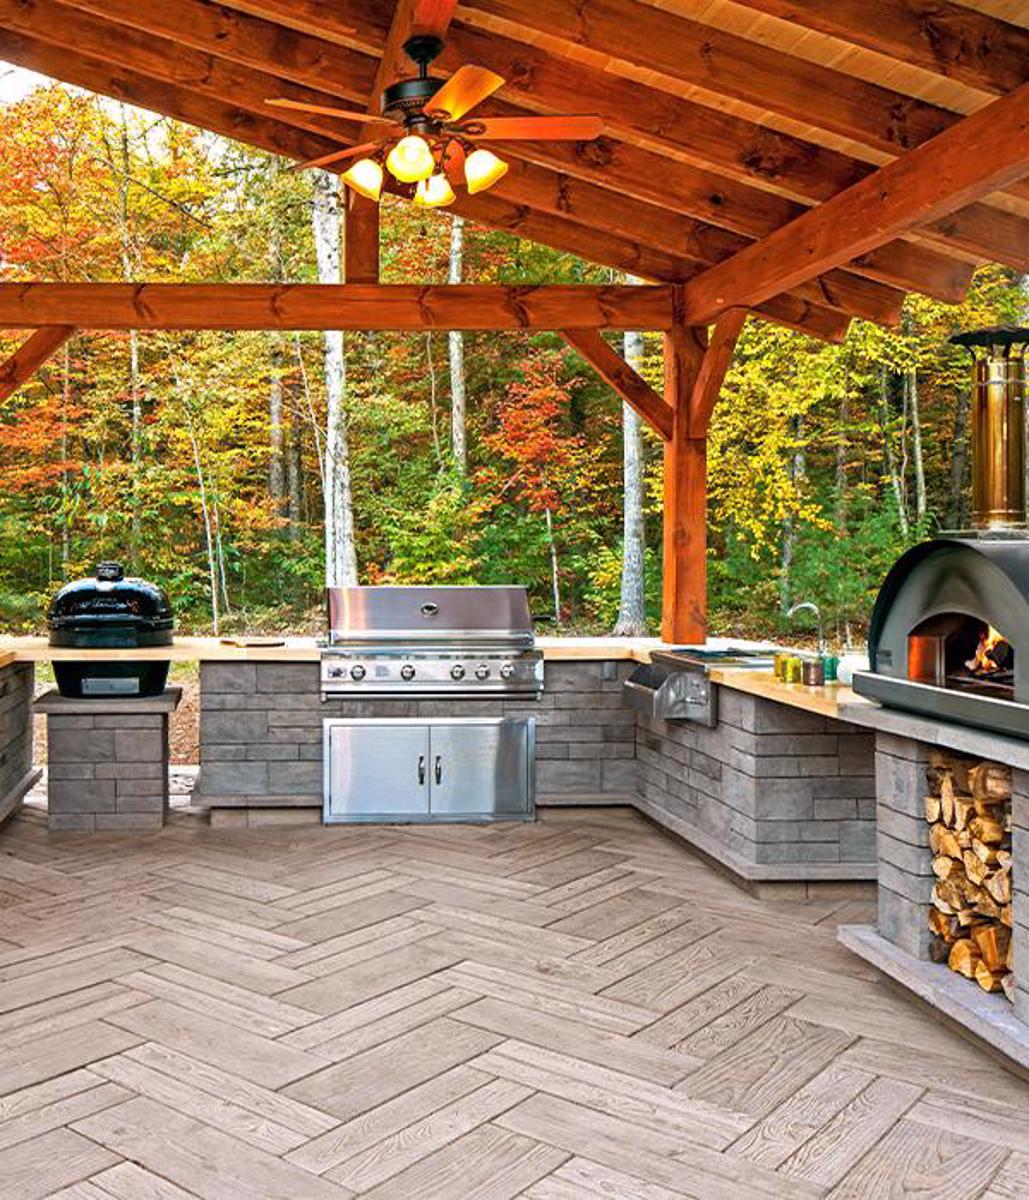 Techo bloc by style backyard outdoor kitchen bbq grill slabs walls caps grey brown rustic 1